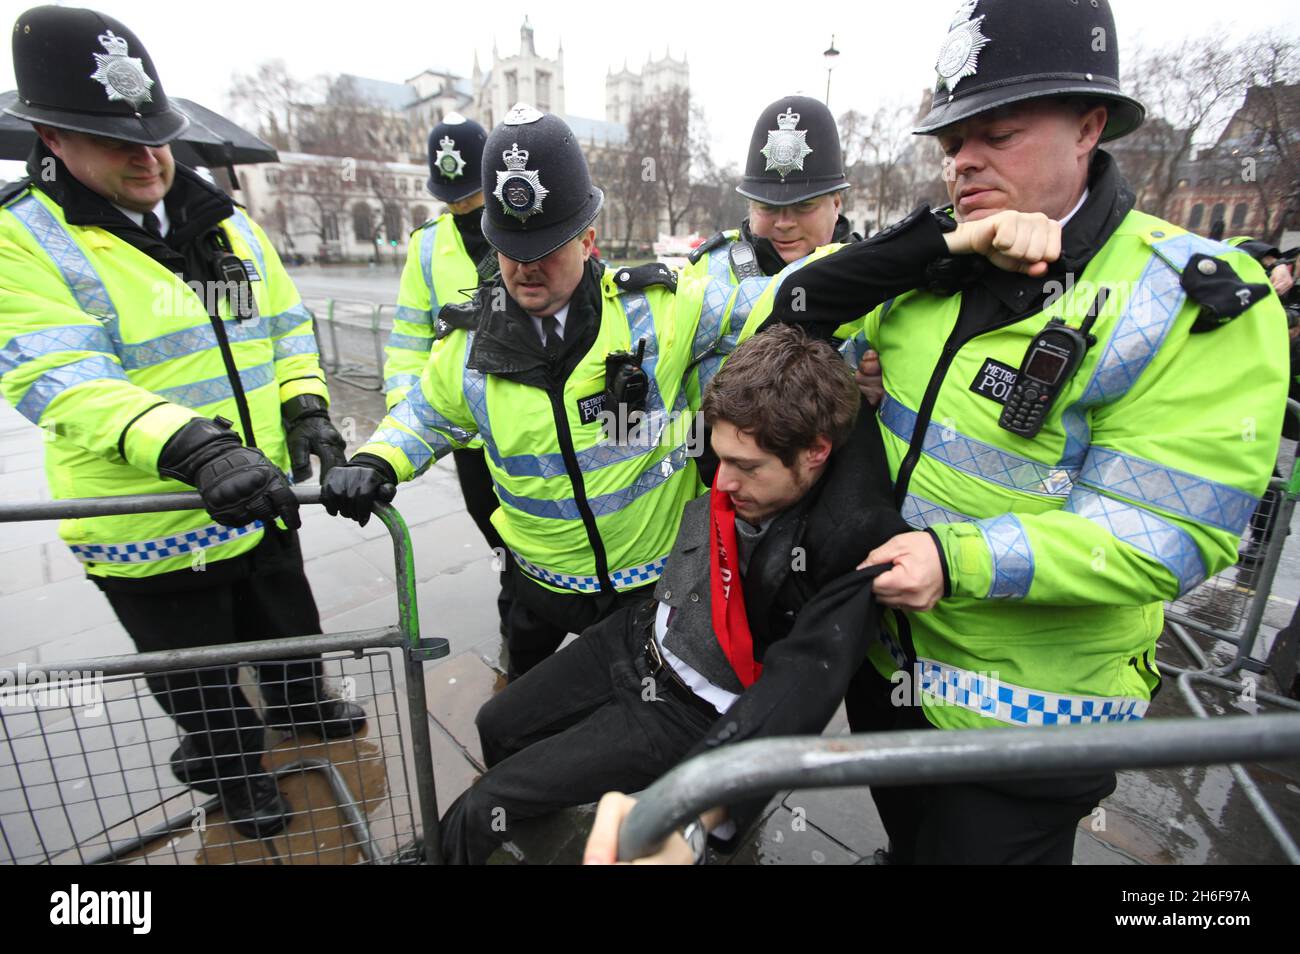 A protester is taken away by the police during a demonstration where protesters chained themselves to the railings of the House of Commons in London in demonstration against the proposed third runway at Heathrow Airport. Stock Photo